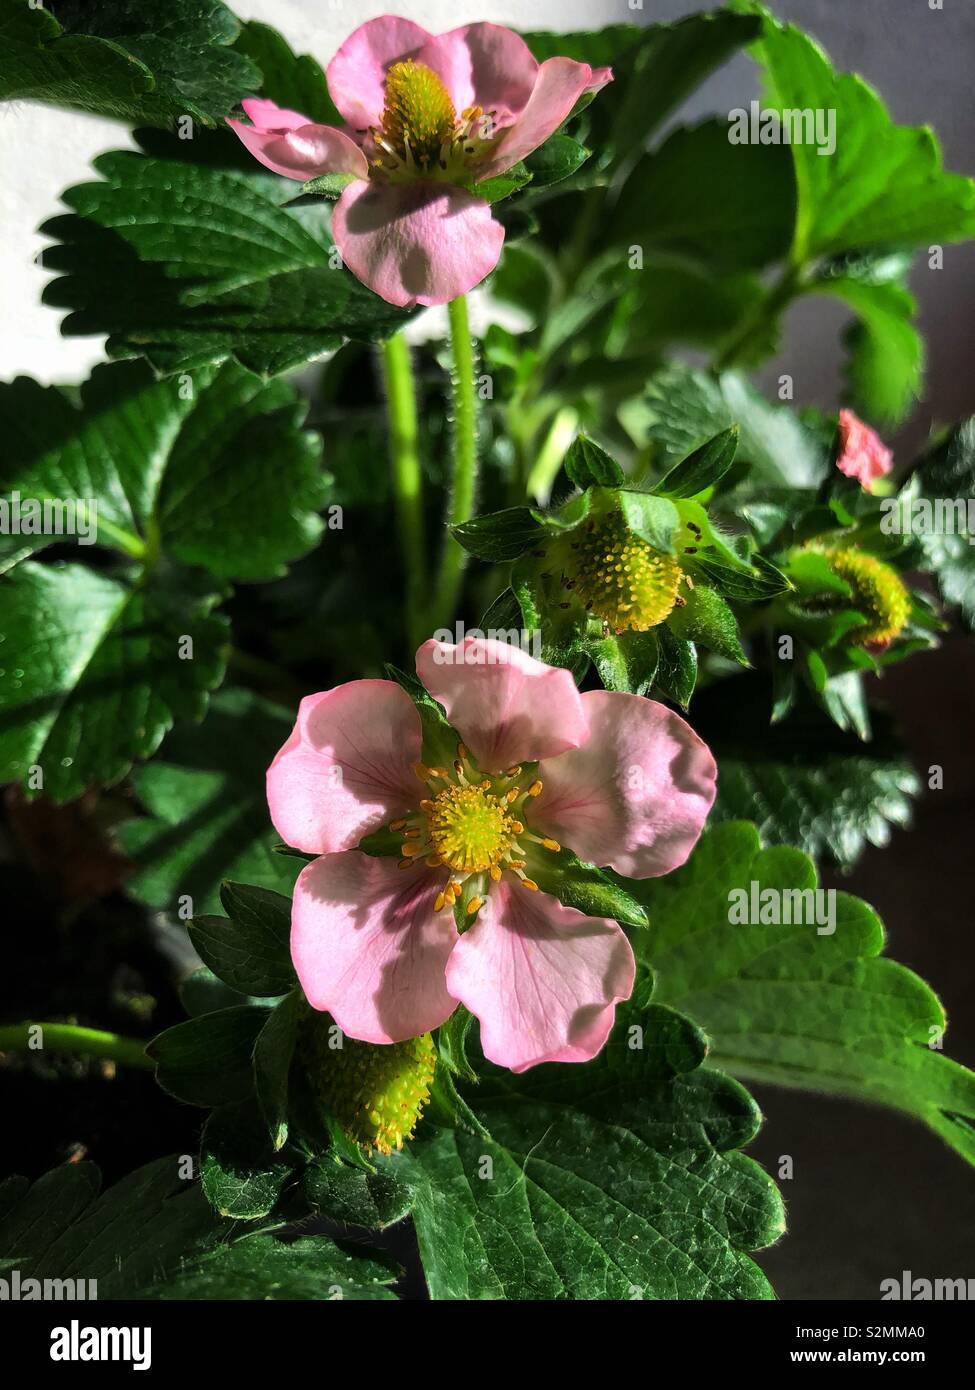 In the market you can find strawberry plants with pastel pink flowers.  Very beautiful and decorative until the flowers become tasty fruits Stock Photo